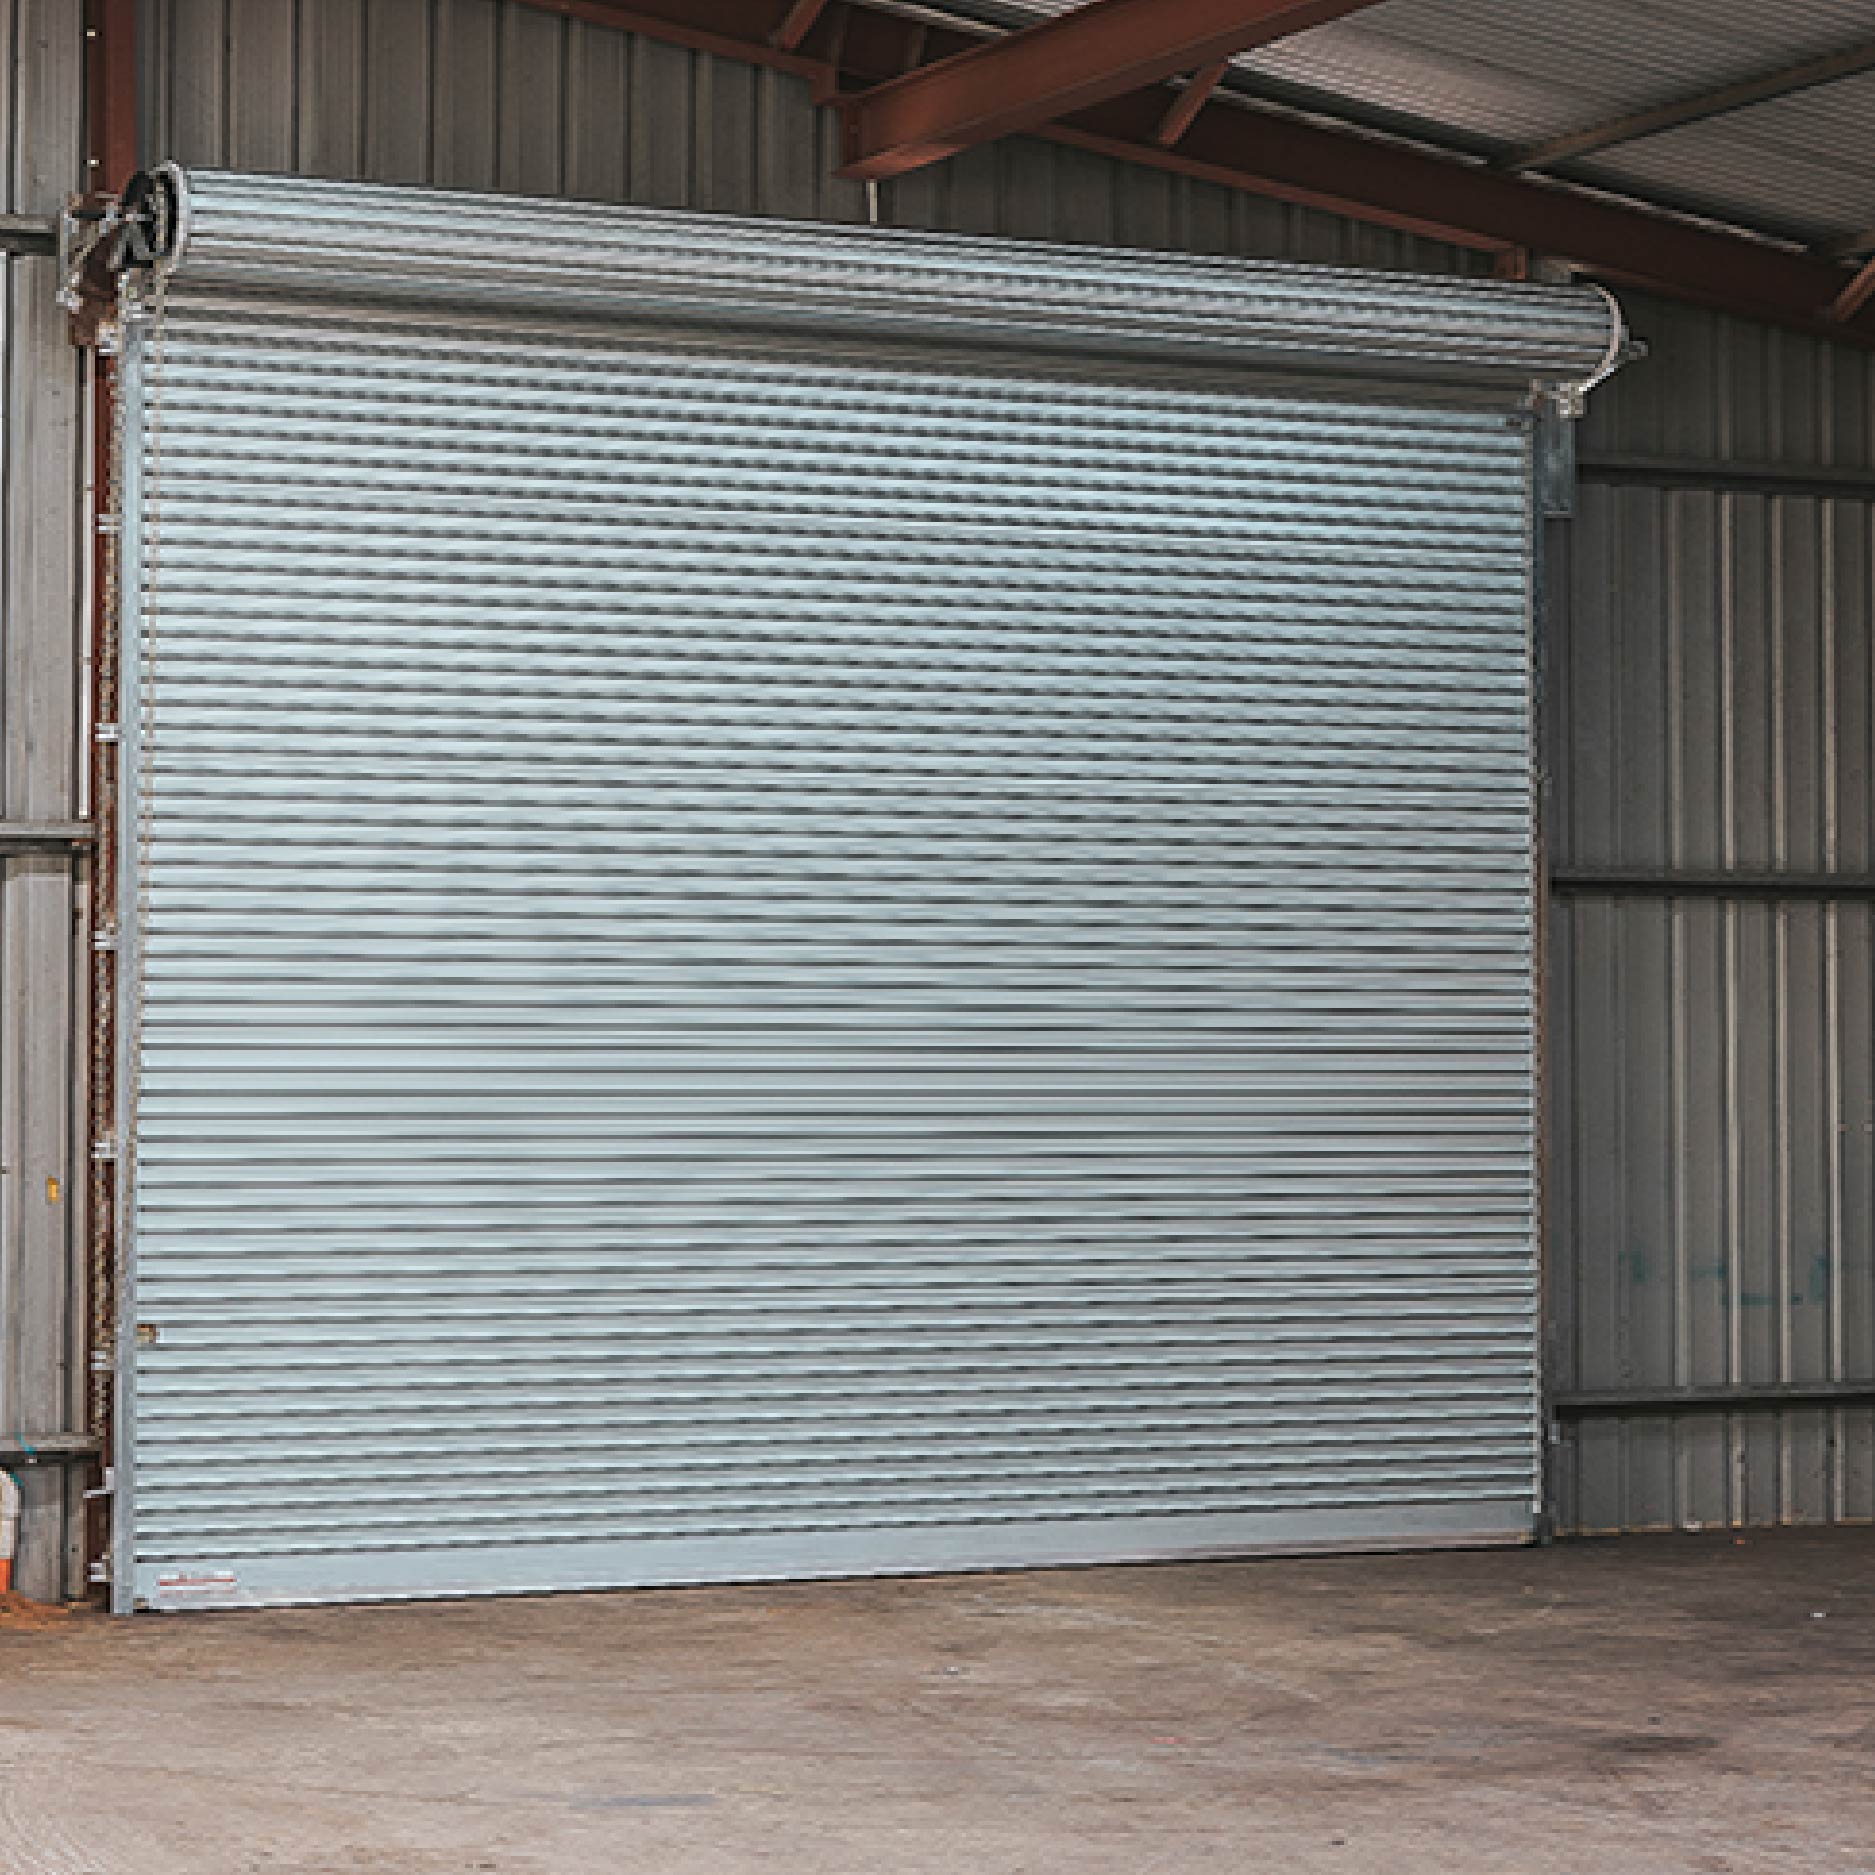 Home - Garage Door Warehouse - YOUR first choice Accredited BND